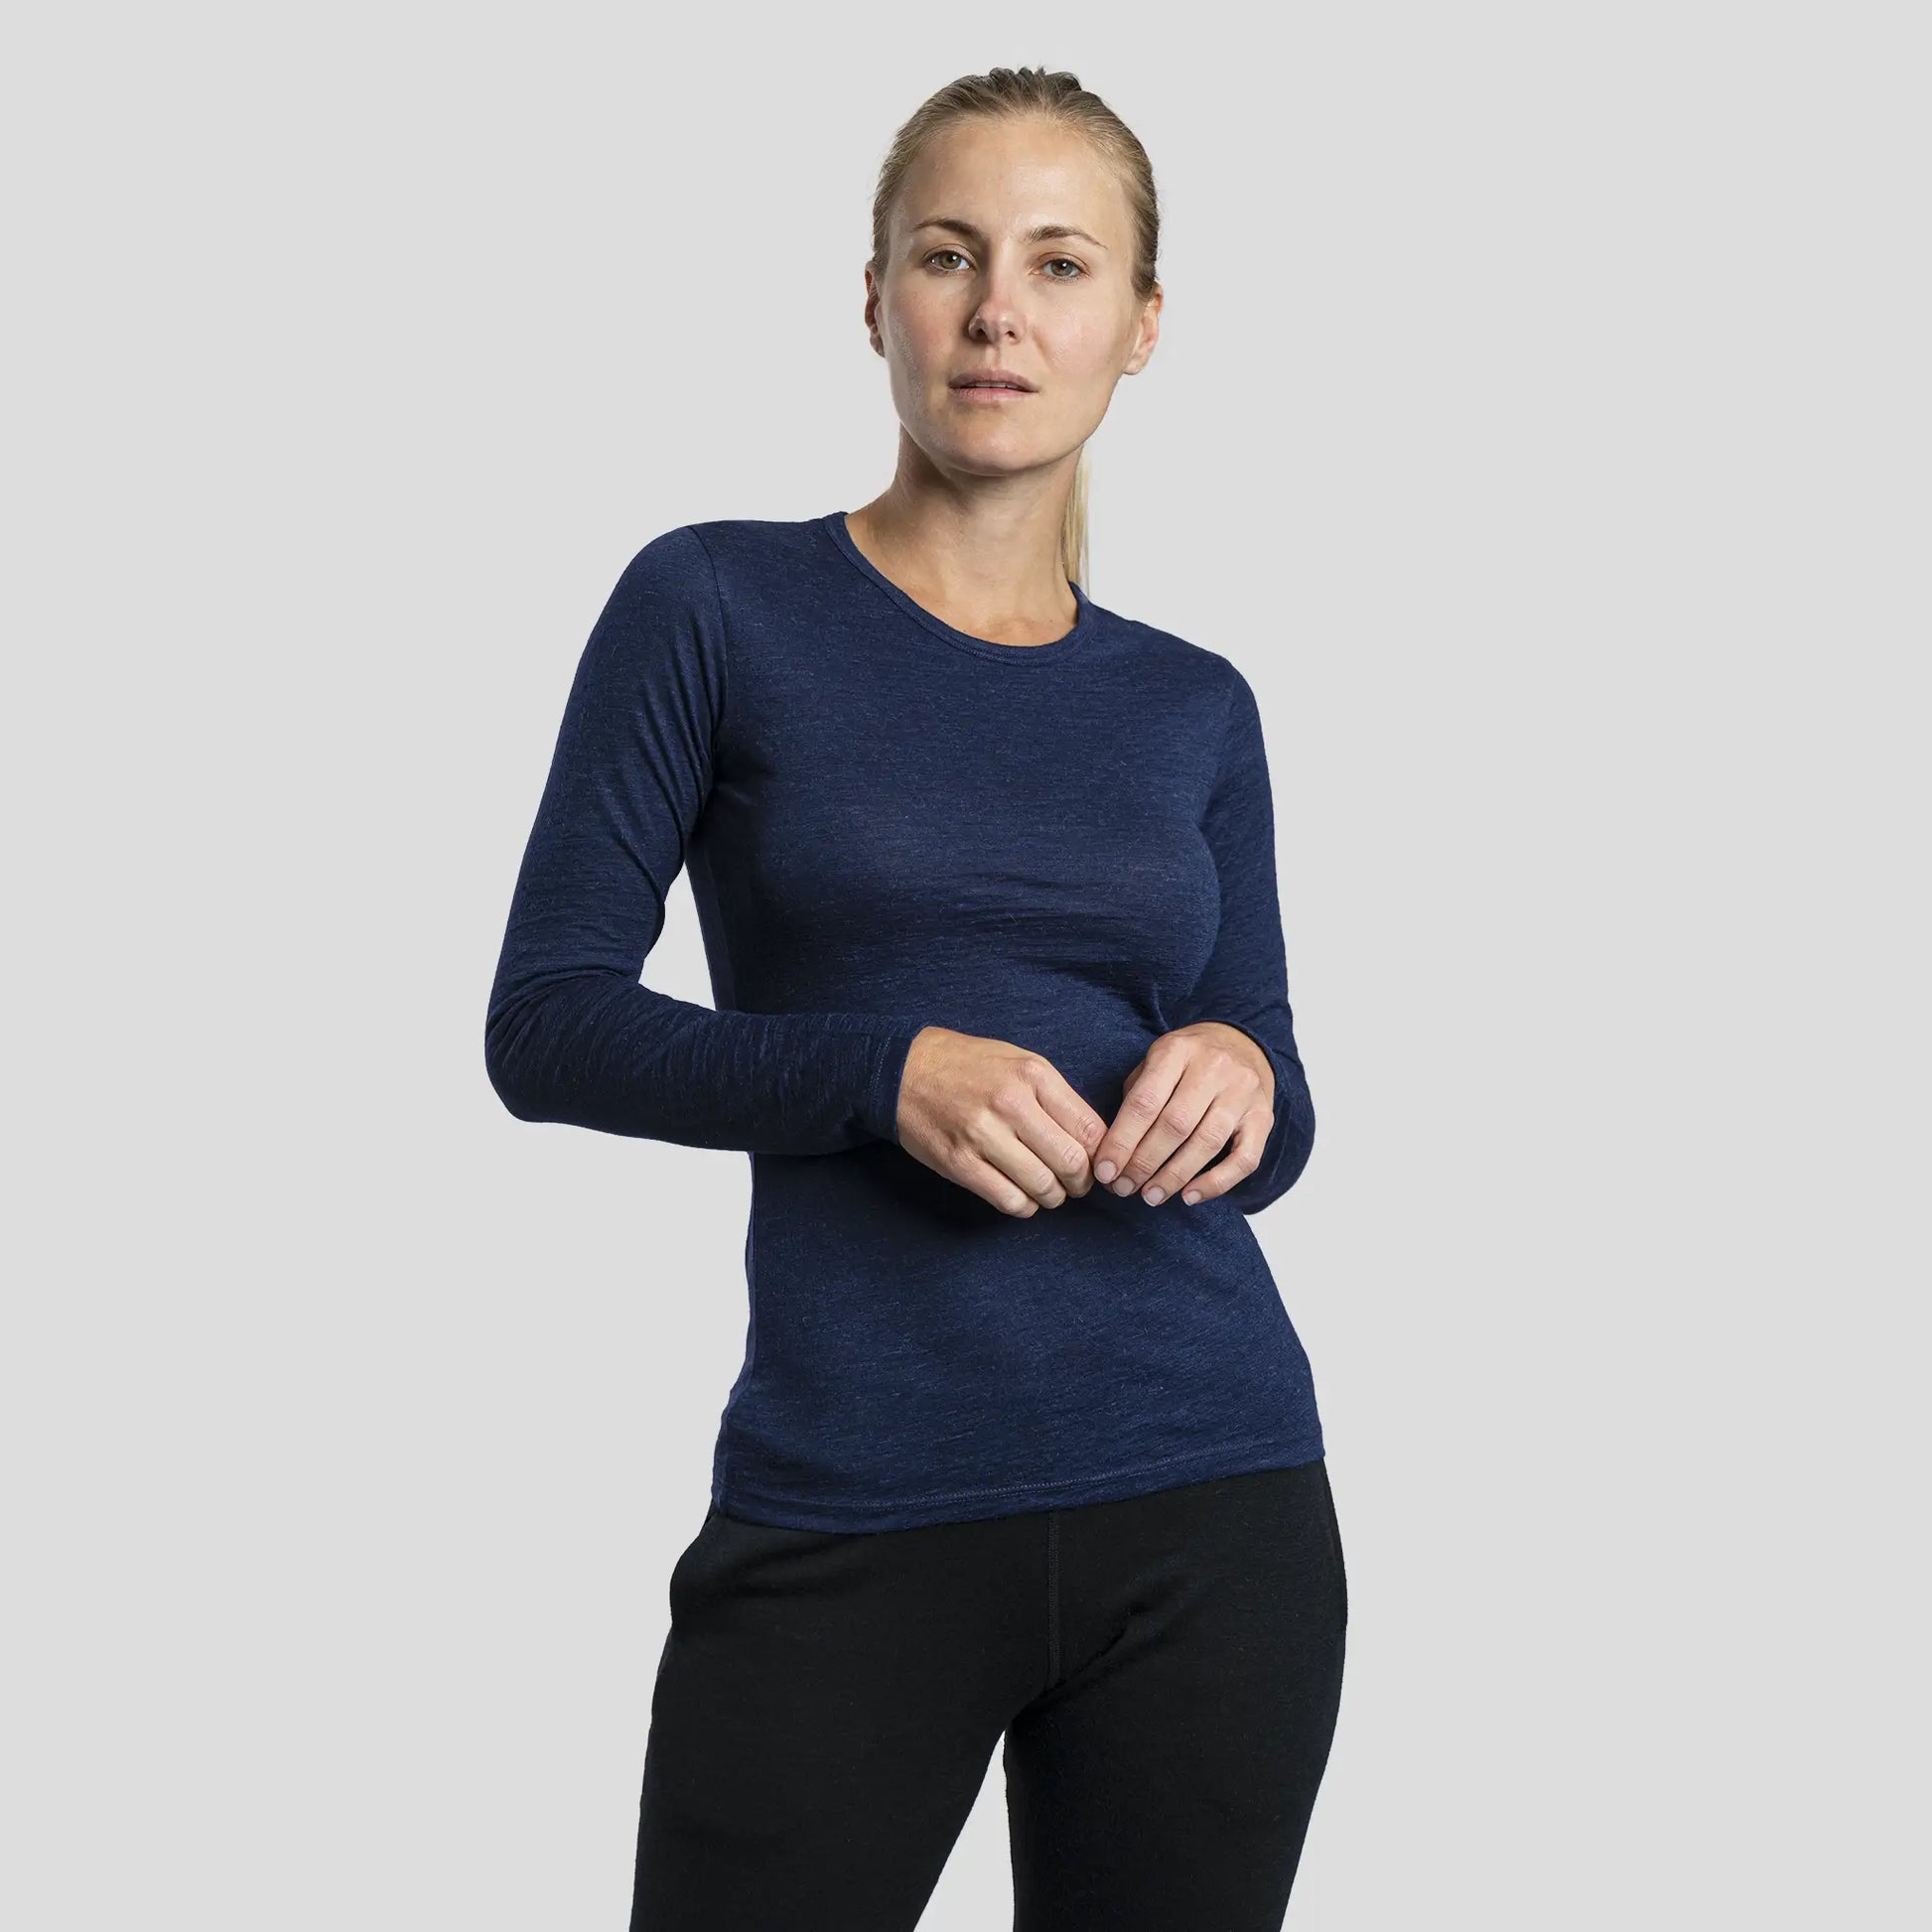 womens breathable long sleeve shirt color navy blue